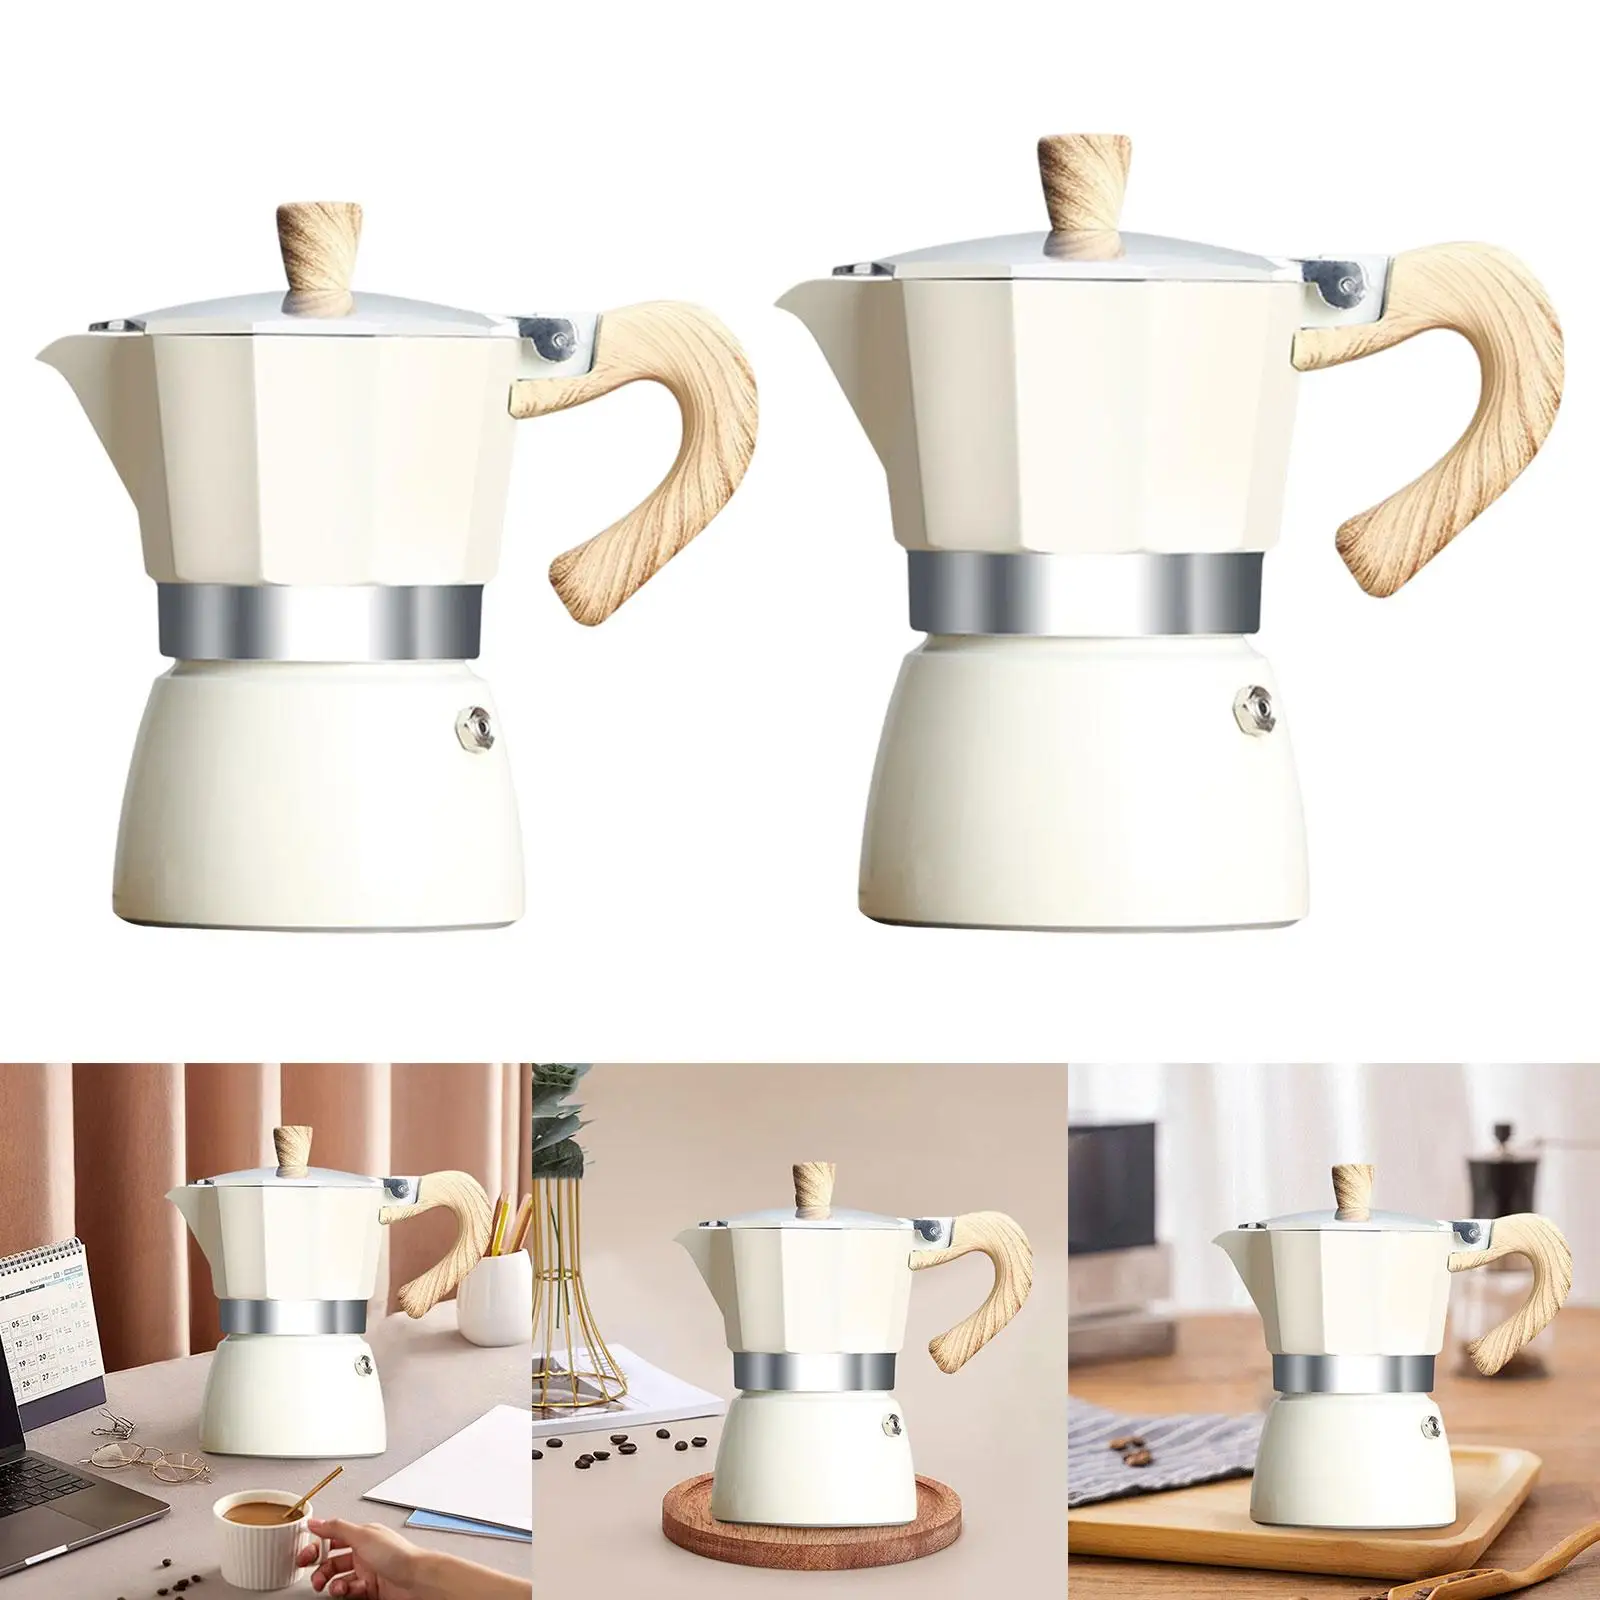 Espresso Maker Pot Kitchen Tools Coffee Maker Pot Coffee Maker Stovetop for Restaurant Office Outdoor Camping Cafe